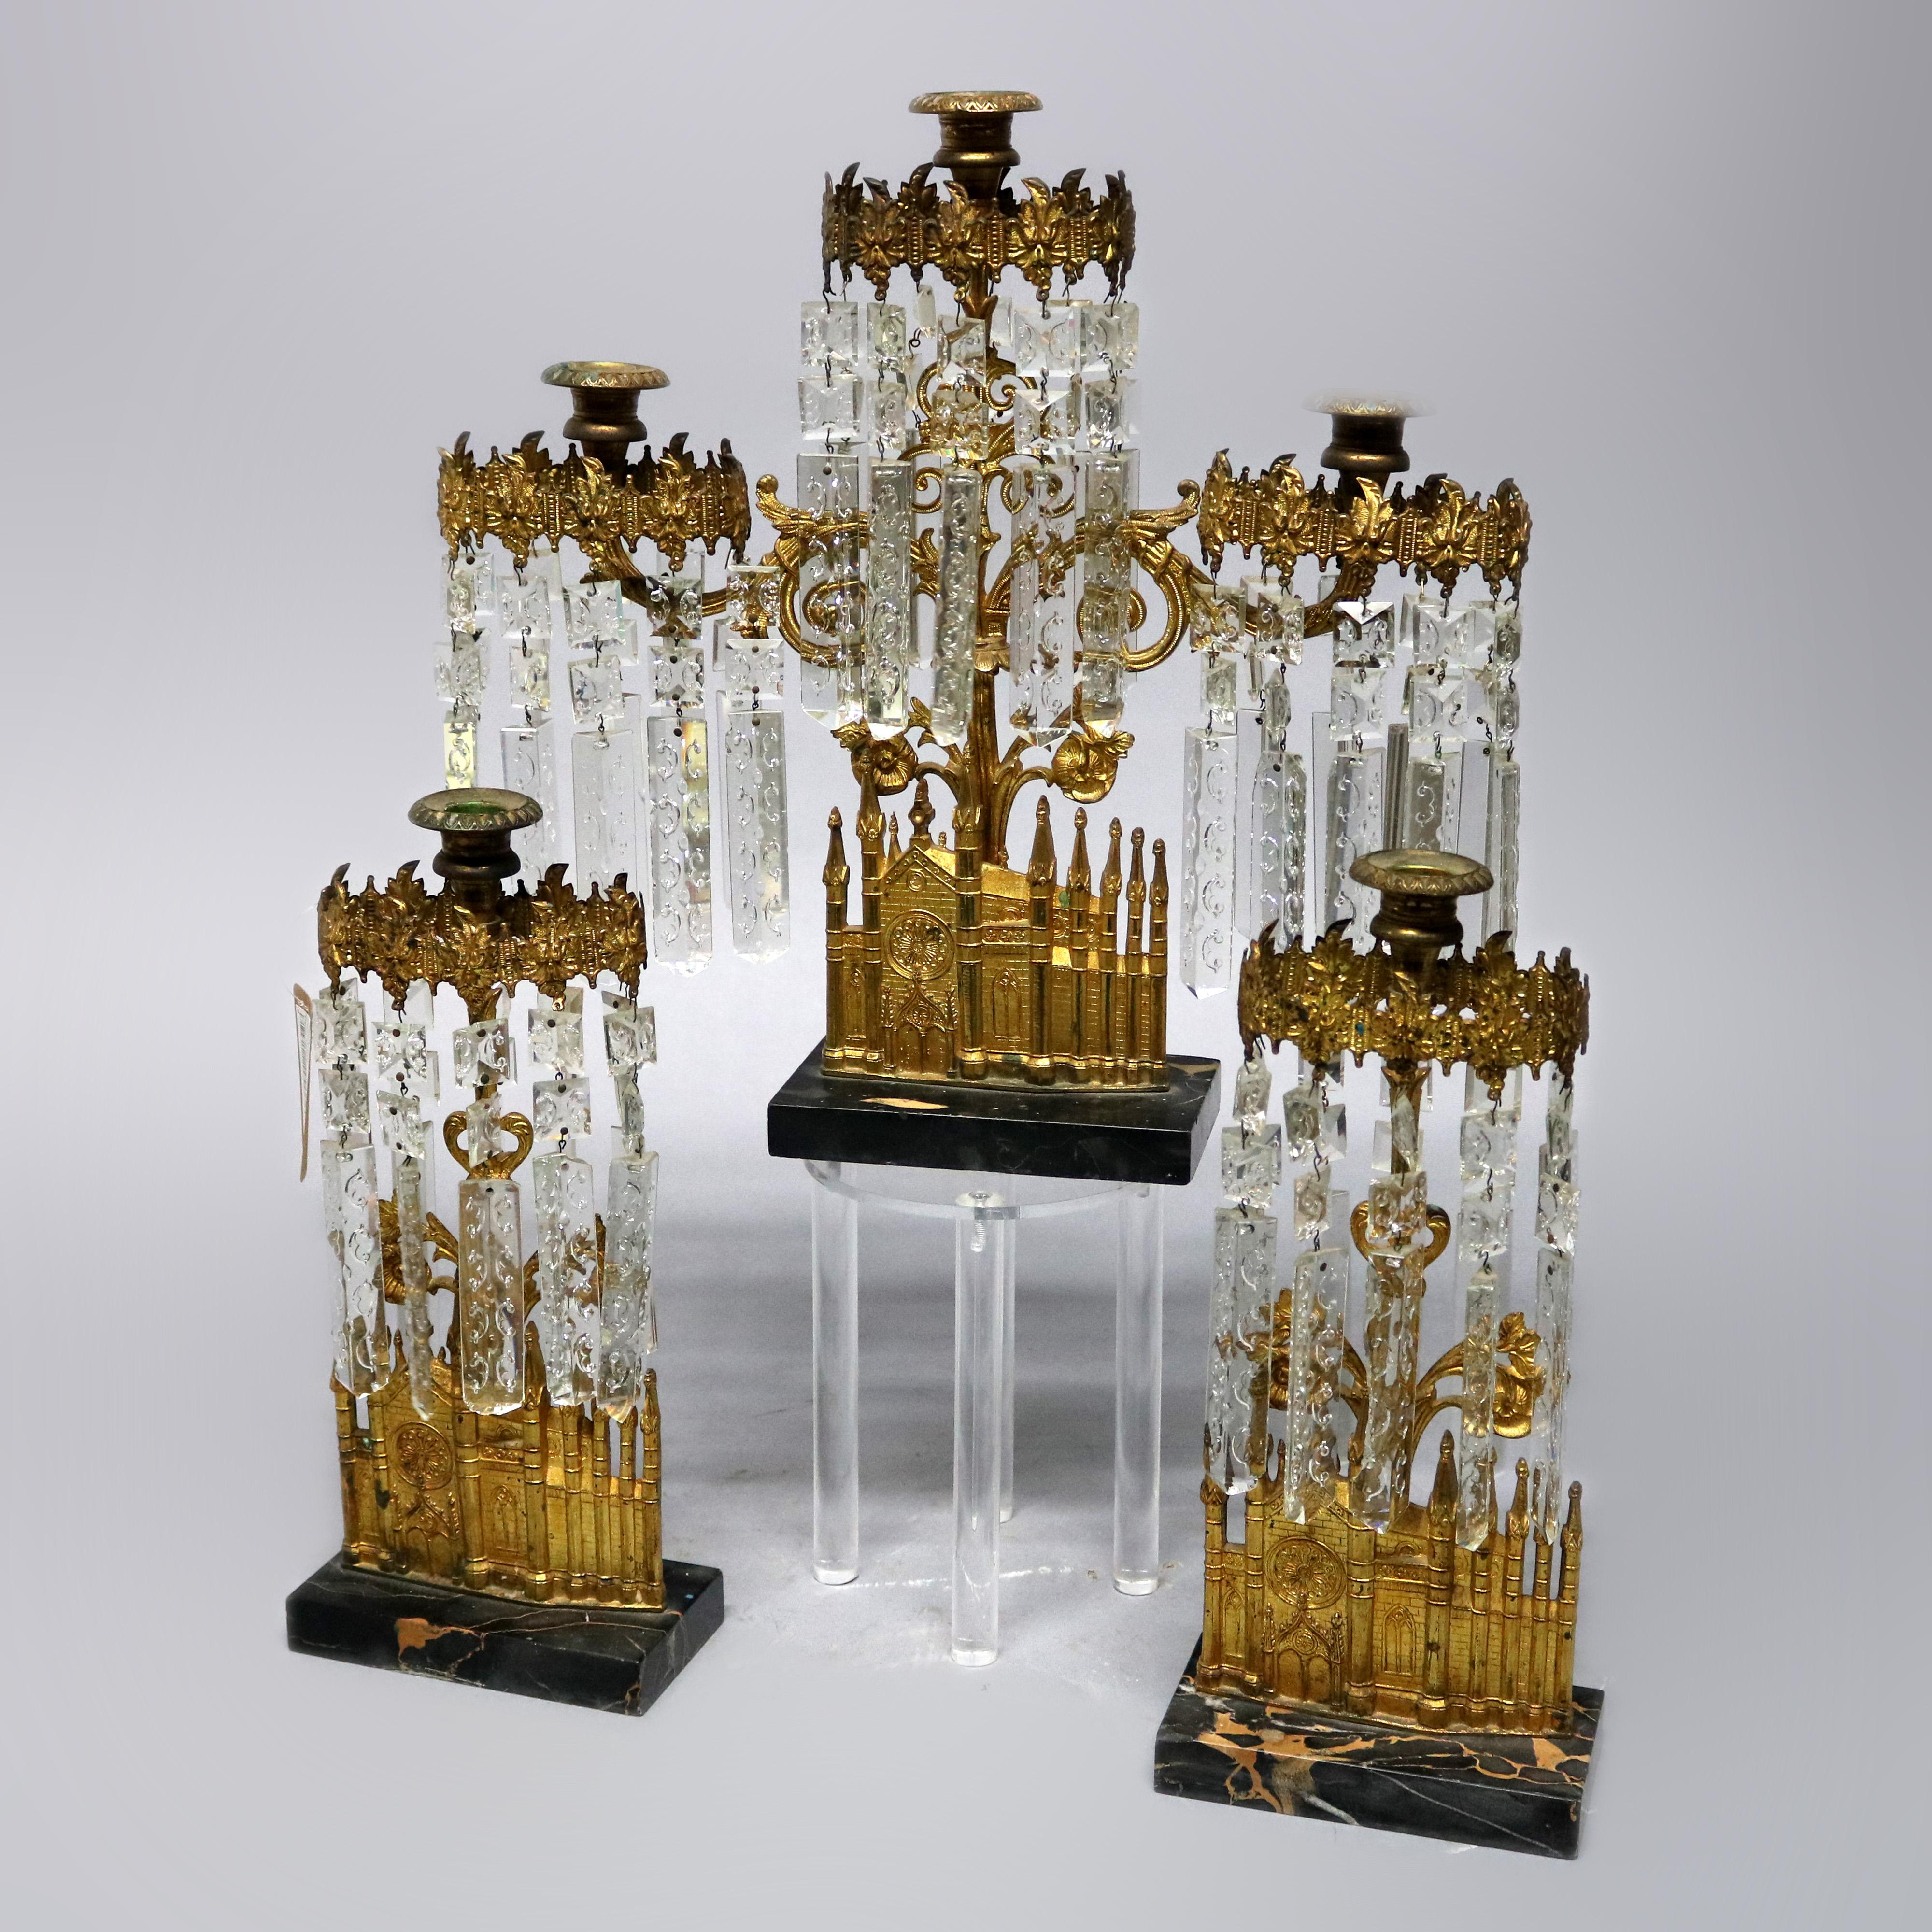 An antique garniture girandole set offers gilt bronze architectural casting of Bigelow Chapel in Boston, MA surmounted by tree form candelabra with scroll and foliate decorated hanging cut crystals throughout and mounted on marble bases, gothic